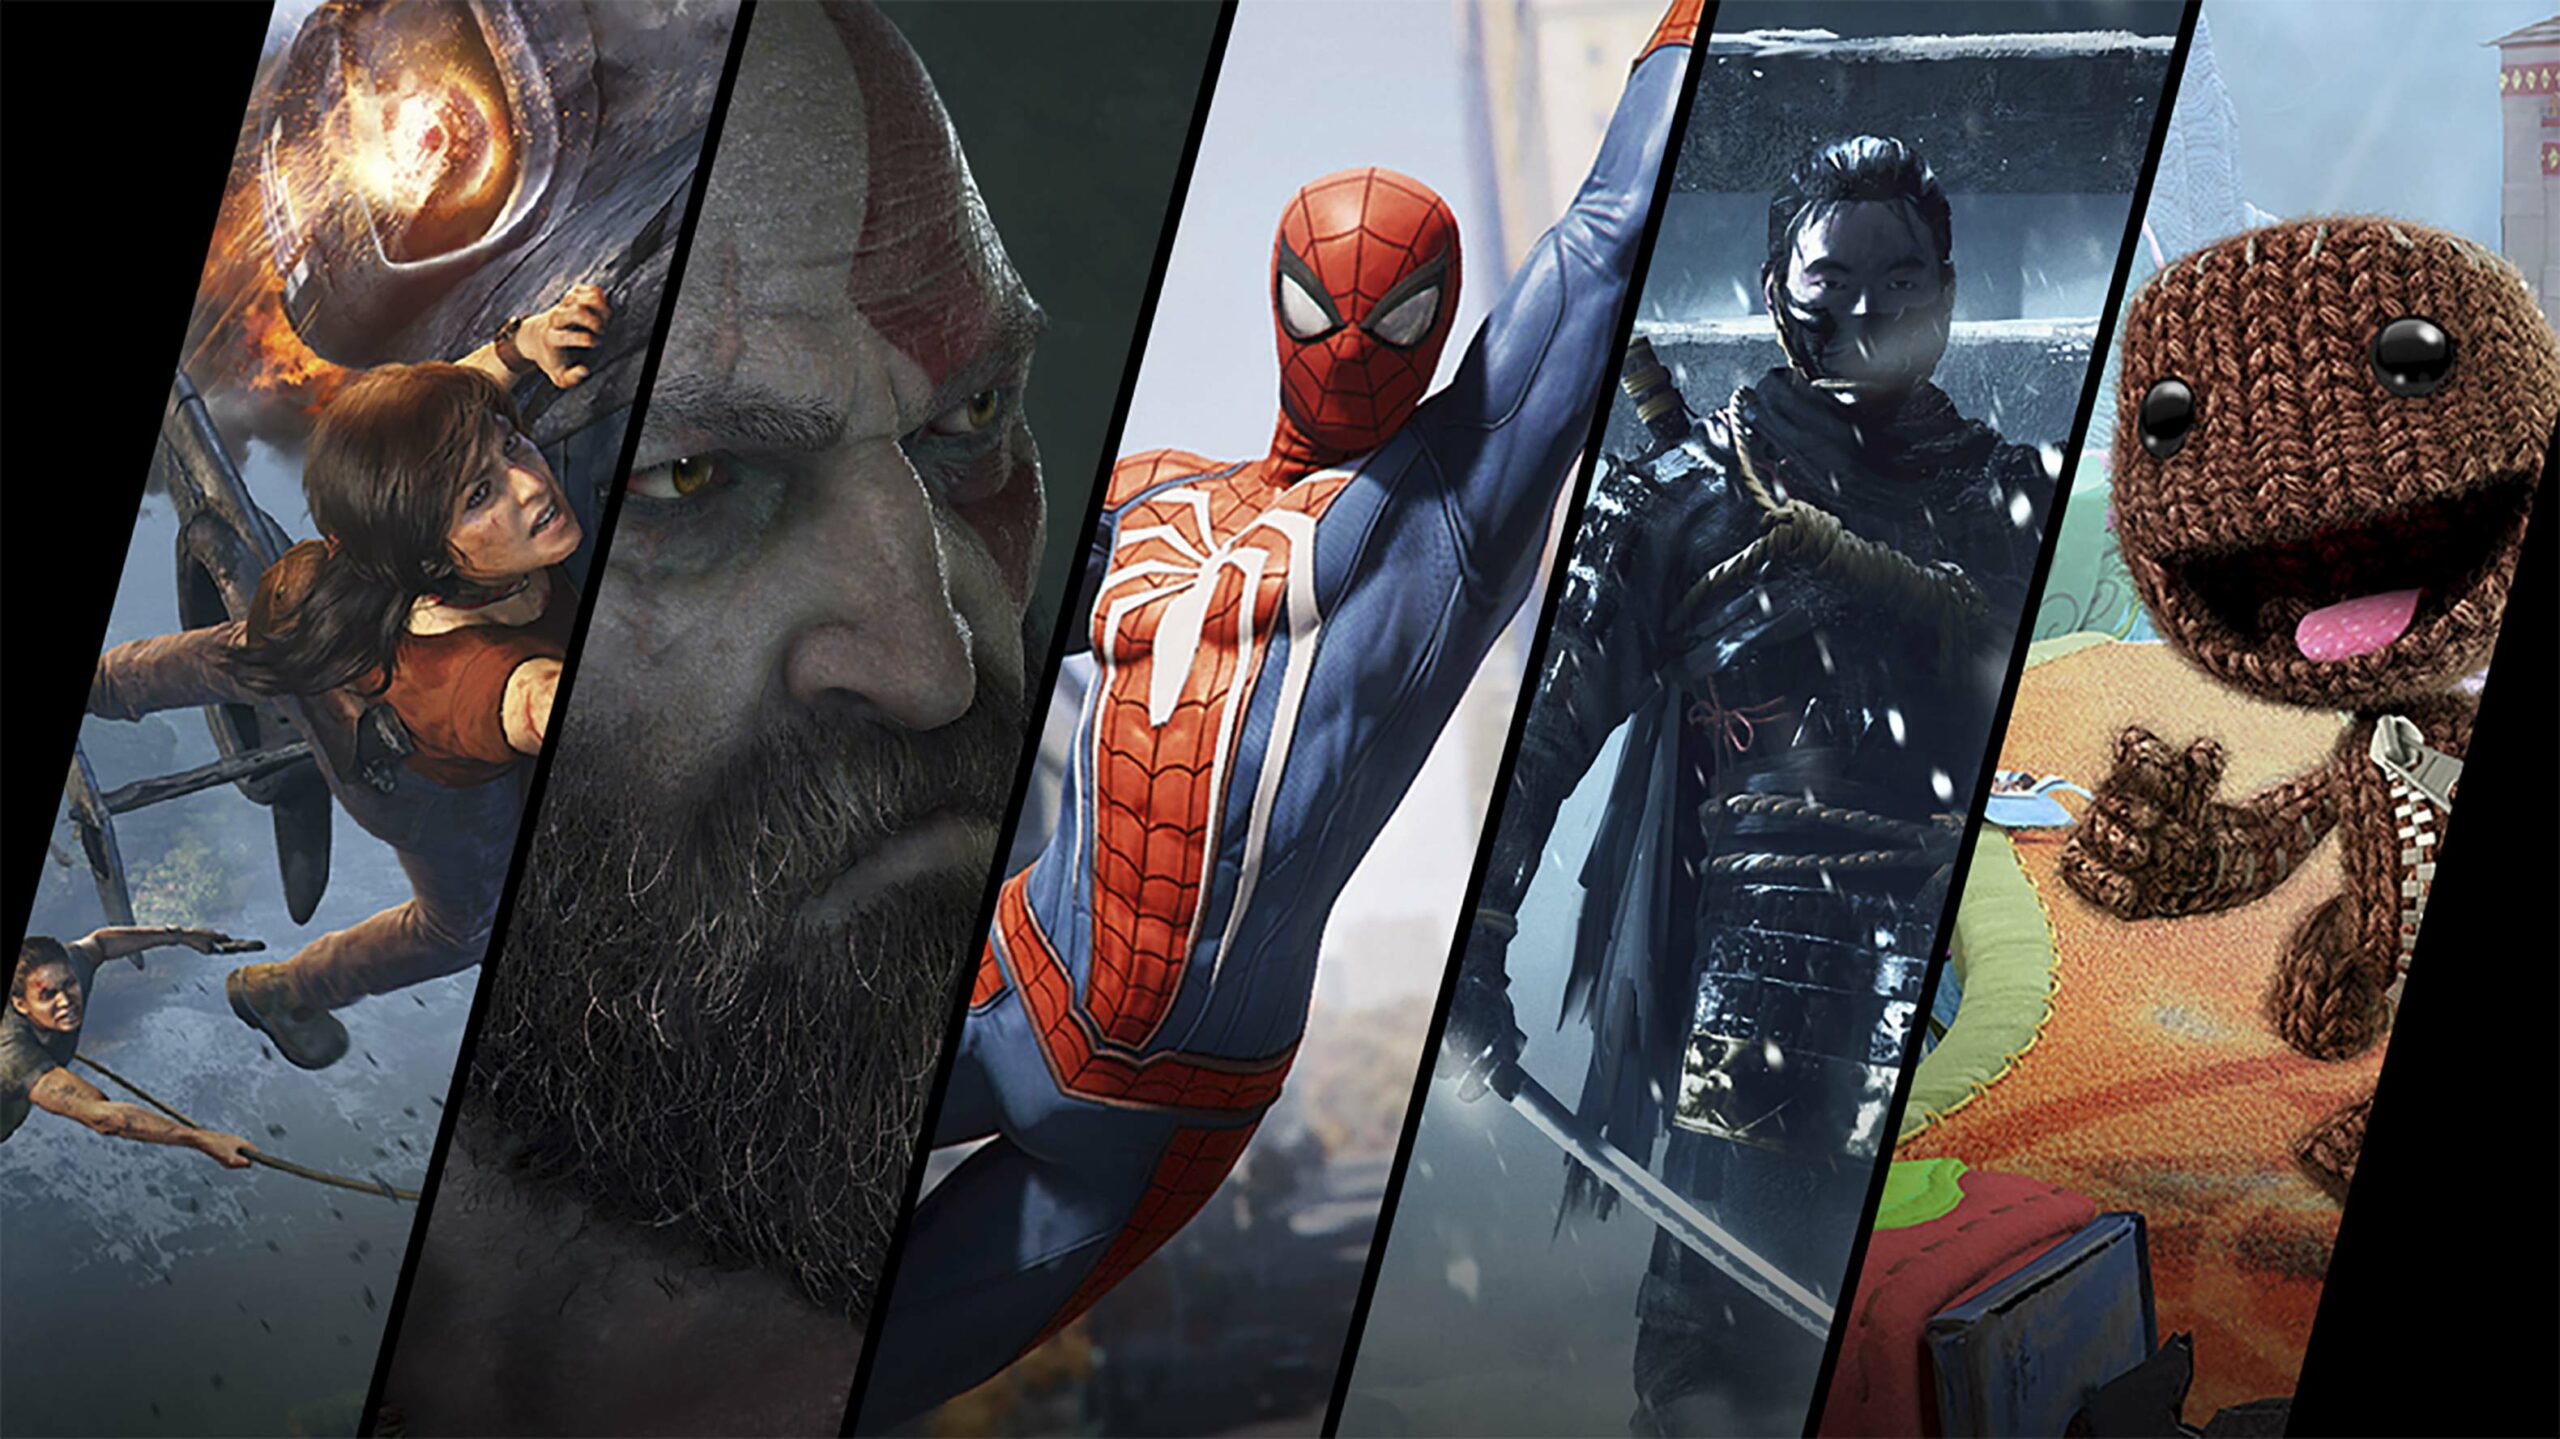 PS4 exclusives